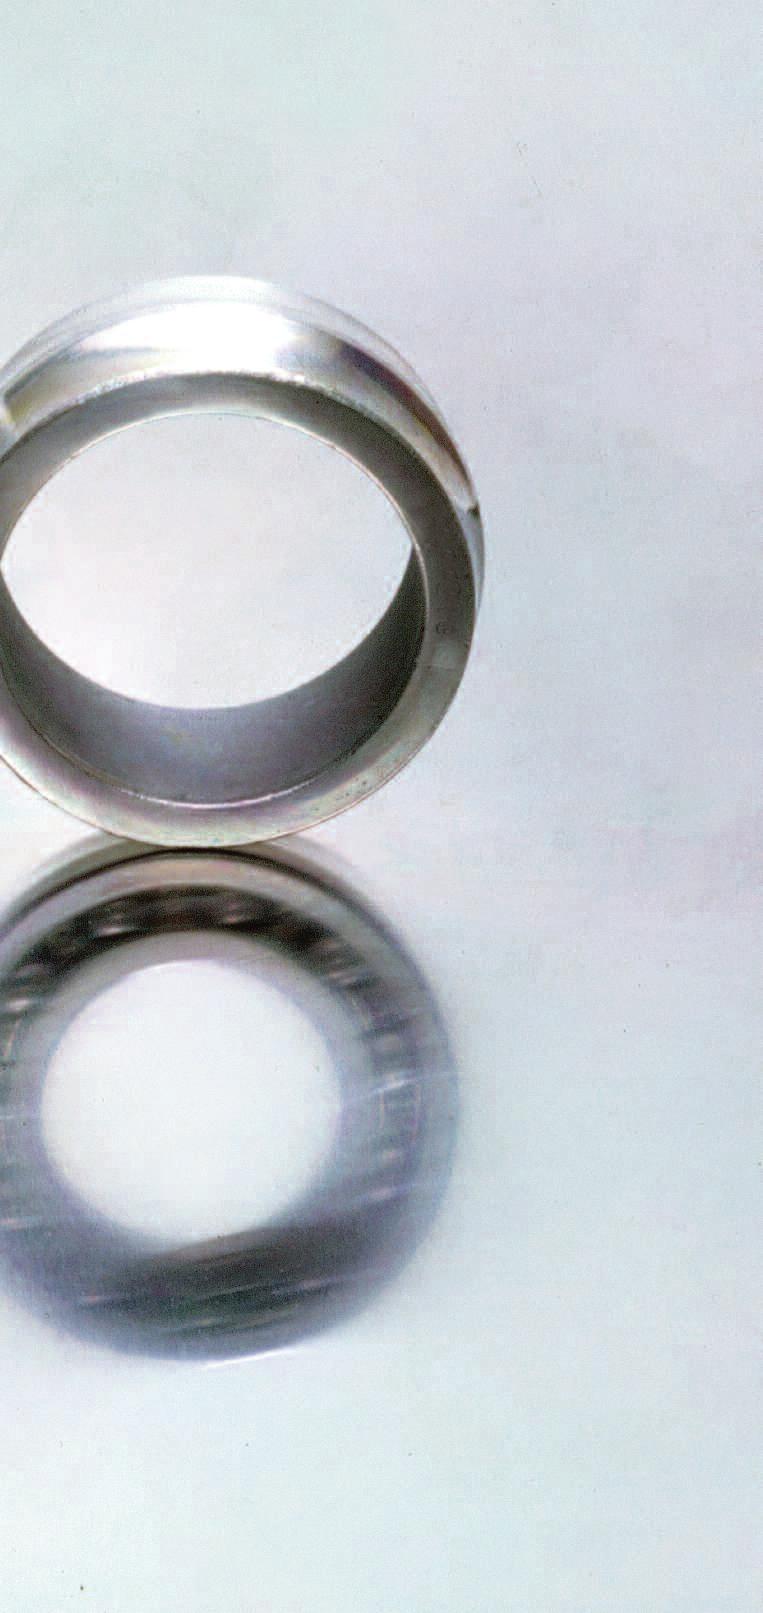 As a supplier to most of the leading bearing producers, we have acquired unique knowledge and experience in this field. Total Control Ovako is a fully integrated bearing steel producer.